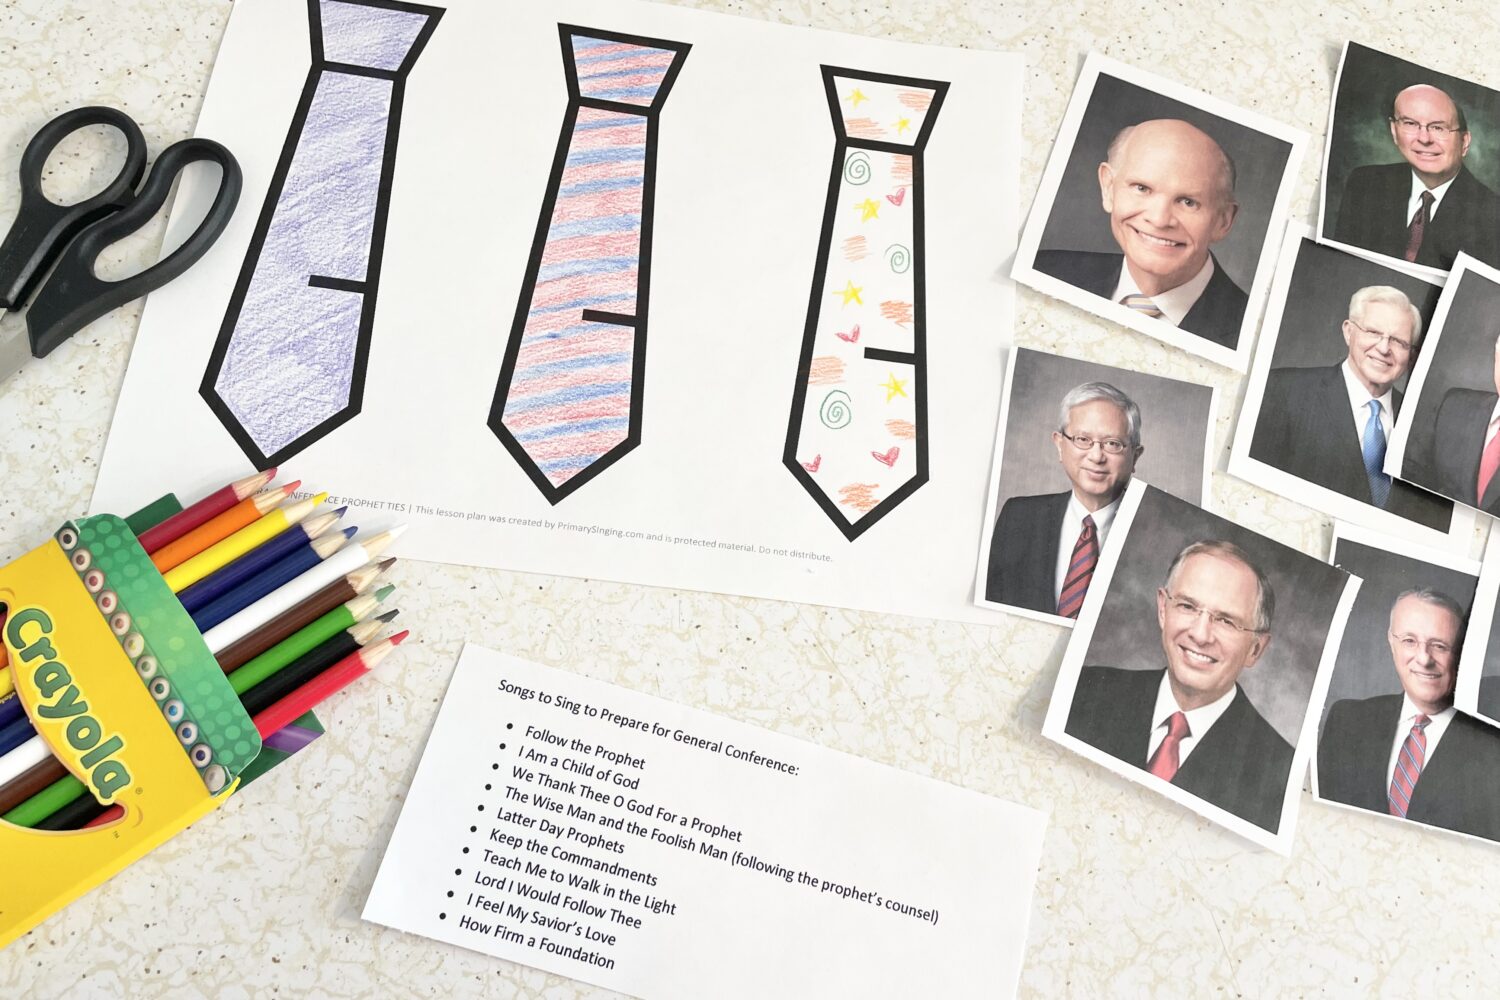 This fun General Conference Prophet Ties activity is a fun visual intrigue idea for children to decorate ties and match them to an apostle for LDS Primary Music Leaders.